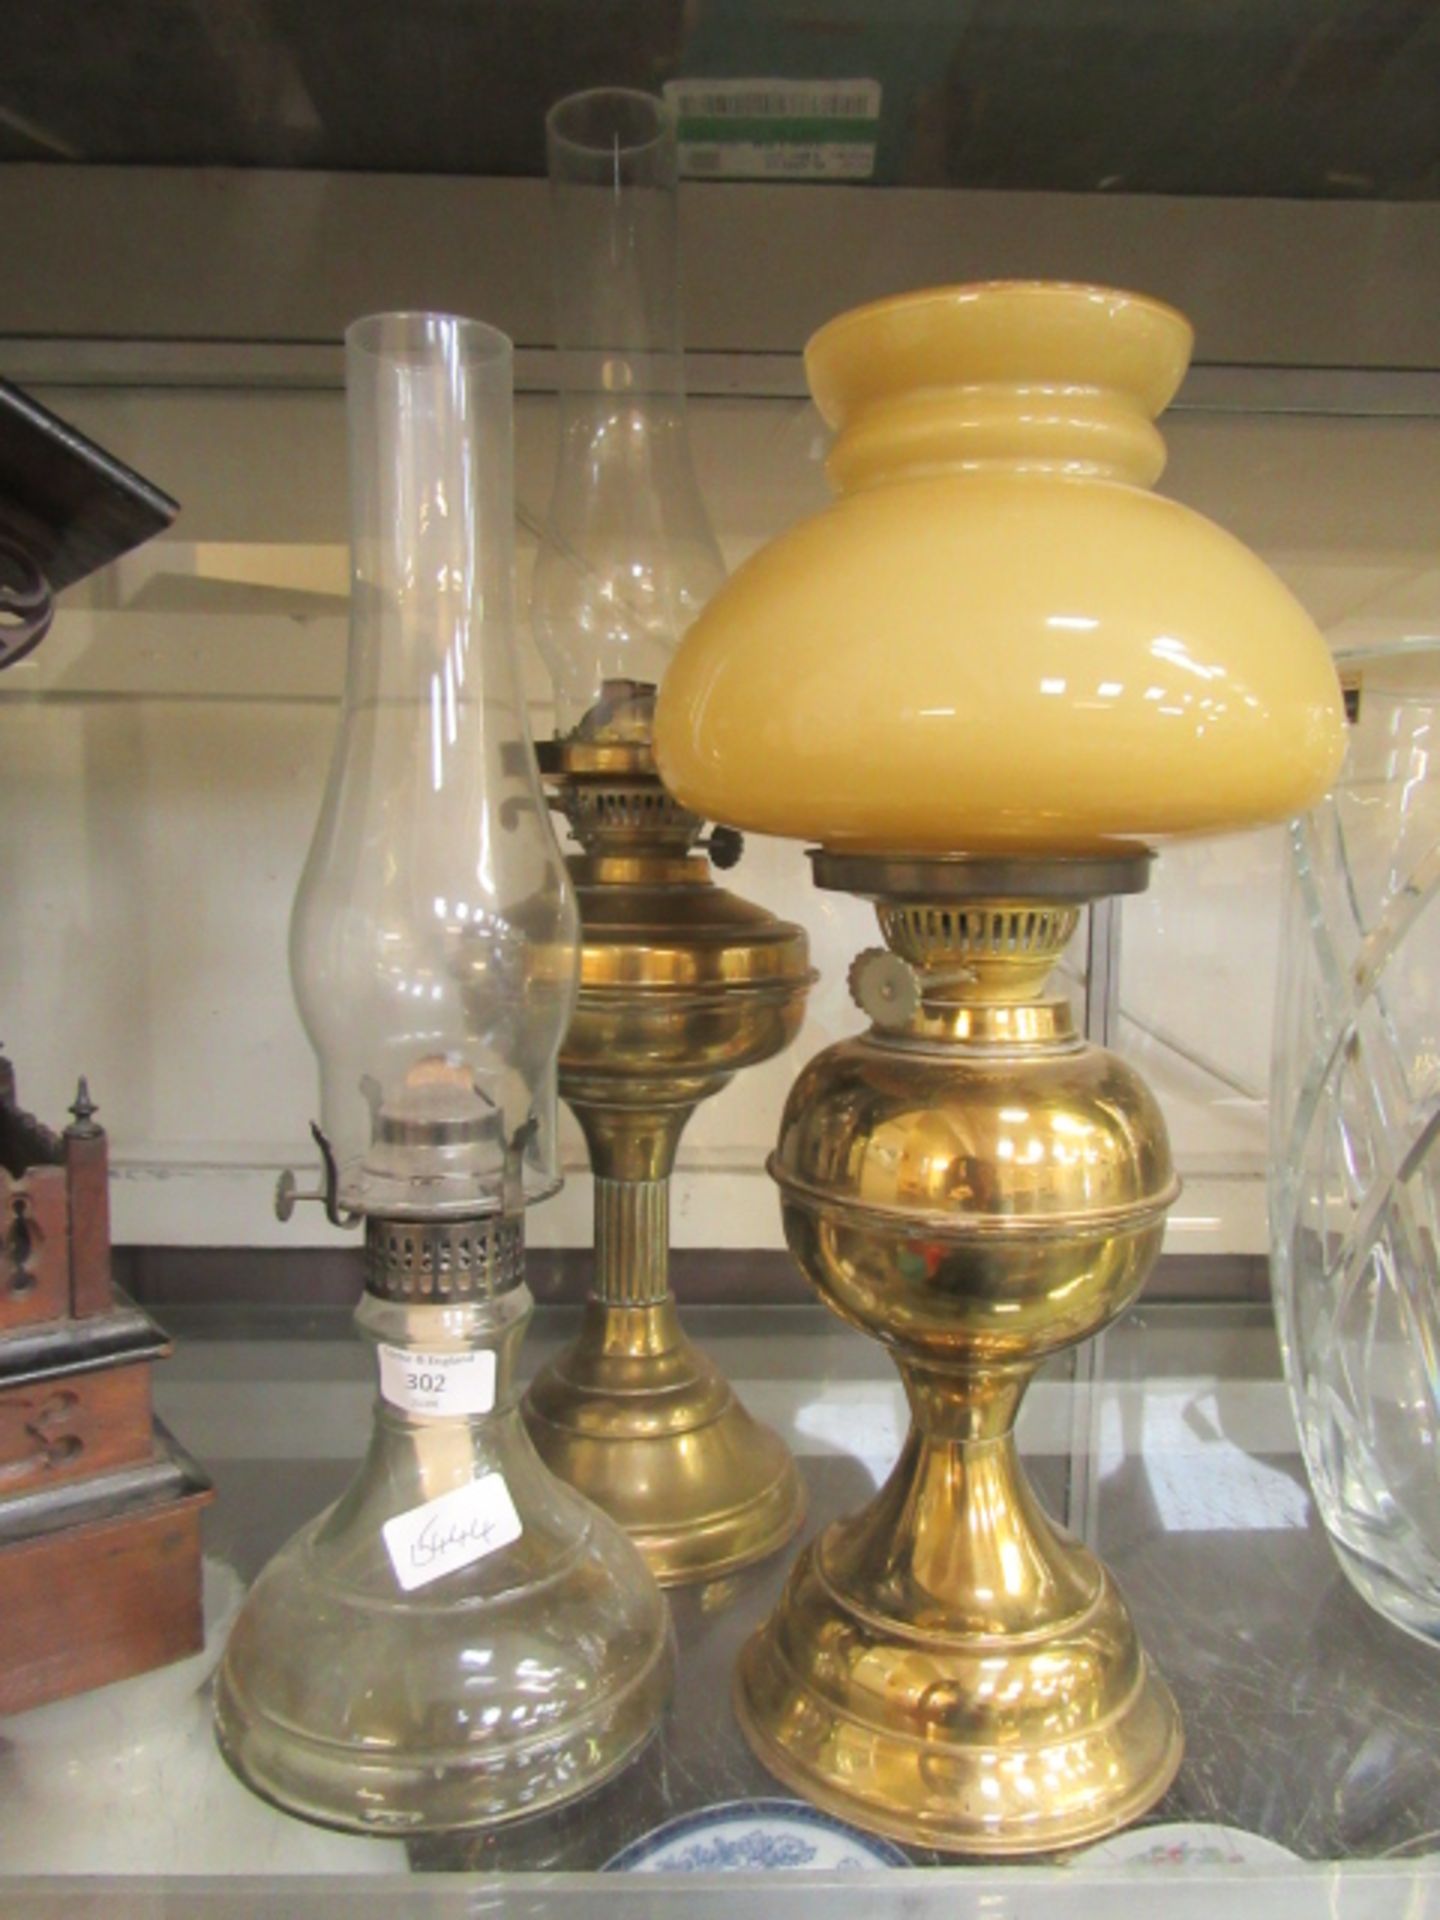 Two brass oil lamps along with a glass oil lamp